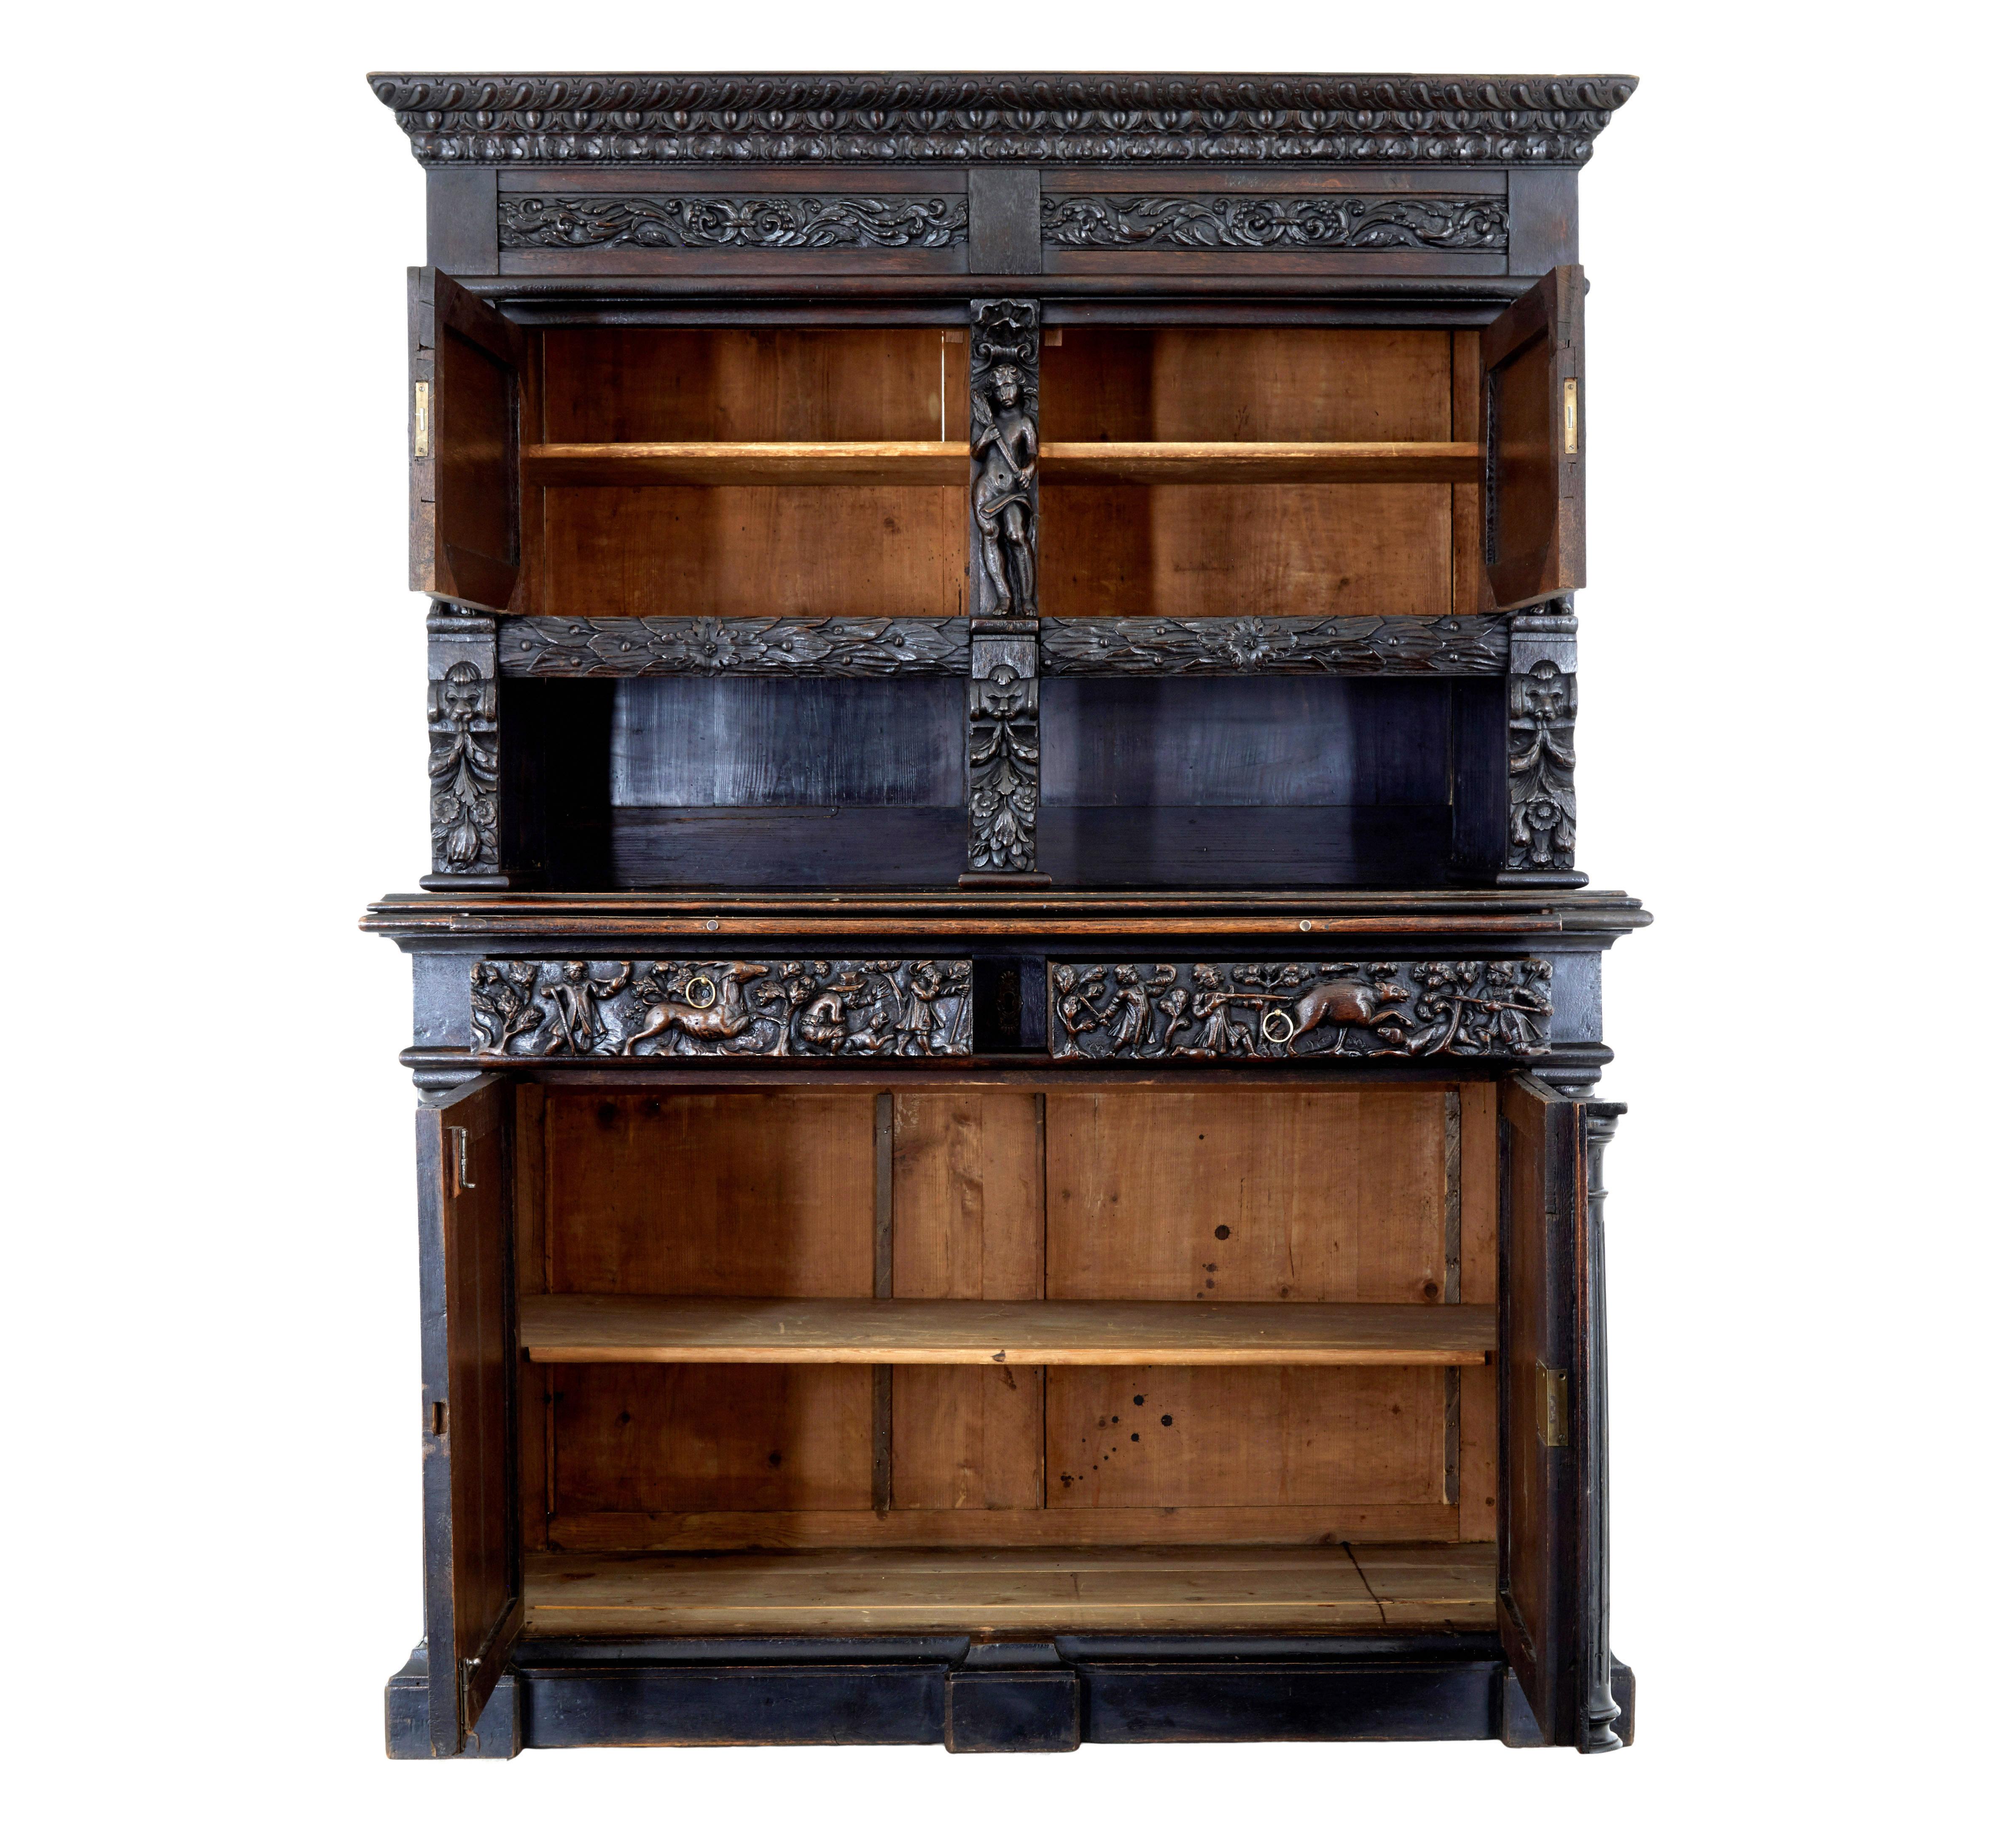 Large 19th century flemish carved oak cabinet circa 1870.

Profusely carved cupboard of grand proportions in the baroque revival taste.  Comprising of 2 sections.

Understated cornice decorated with egg and dart carving with further carved panels